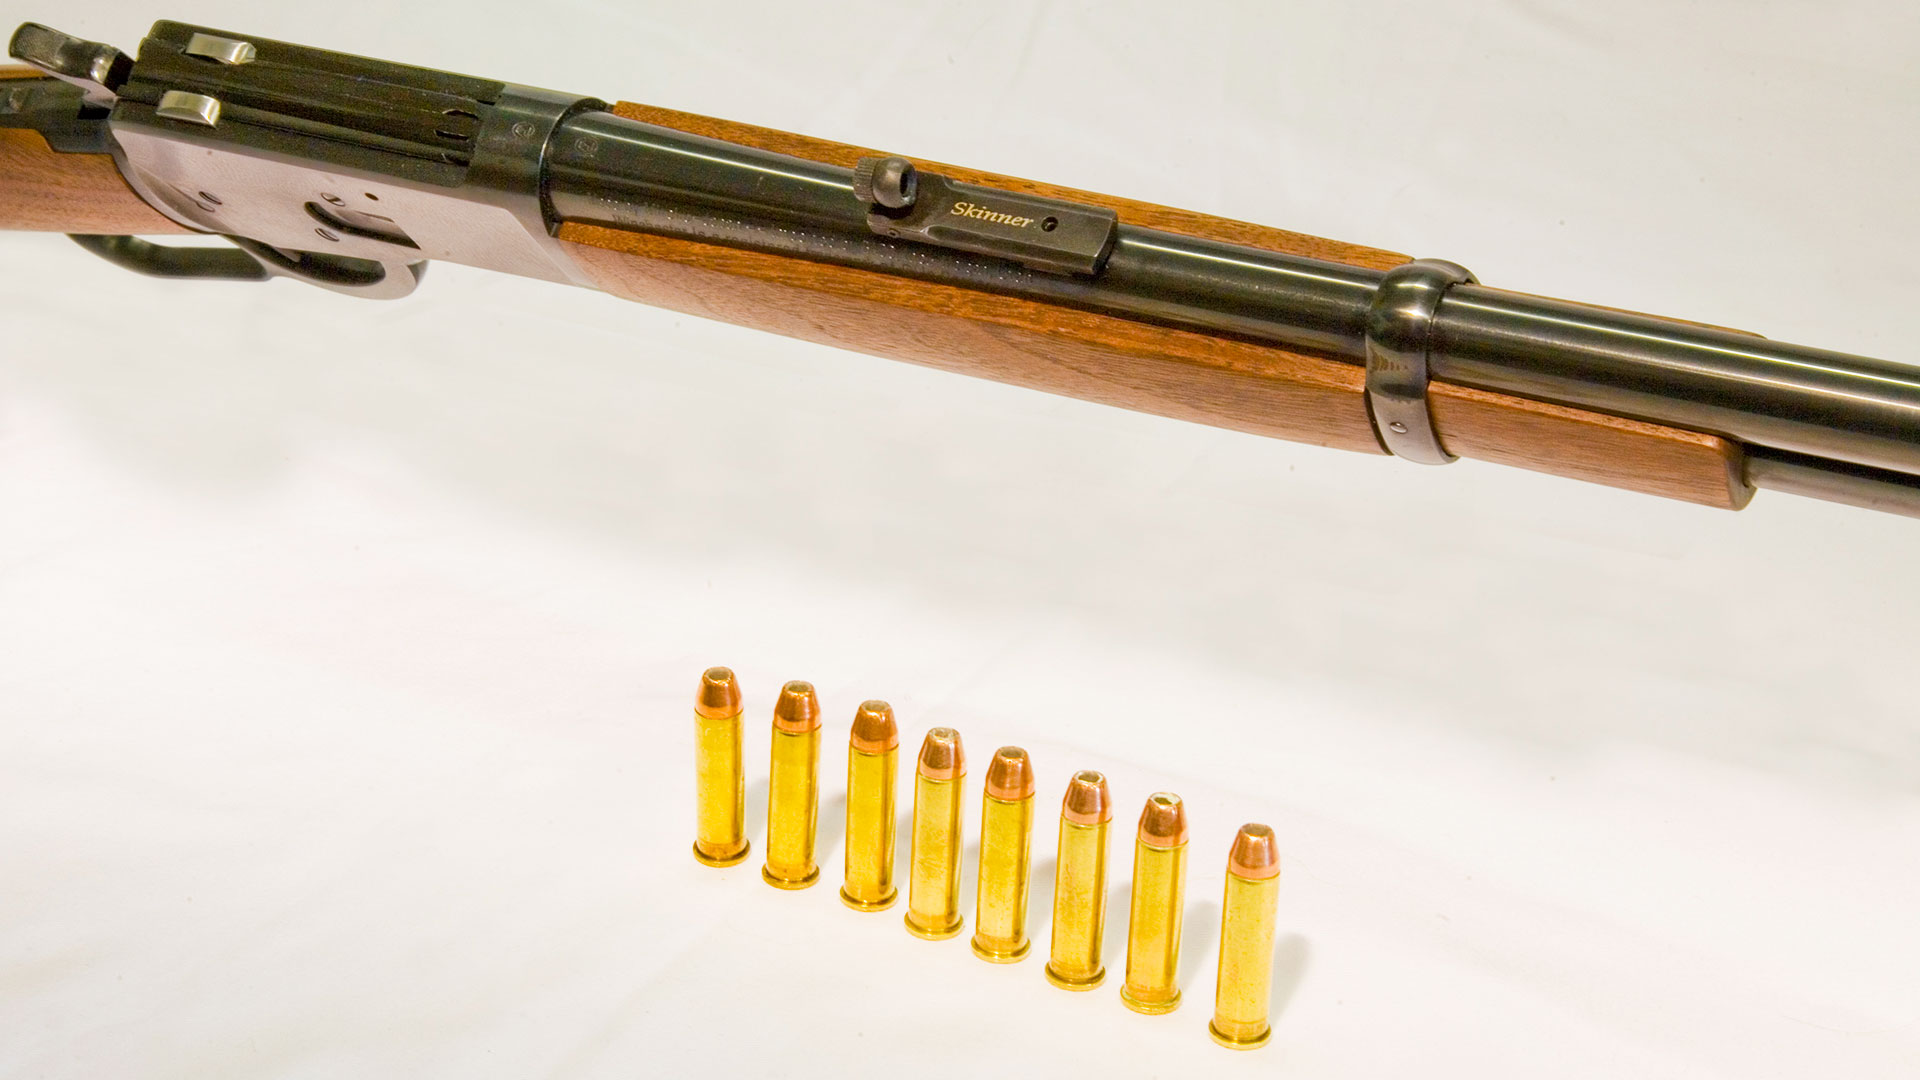 The author's Winchester Model 92 lever-action rifle chambered for the .357 Mag. cartridge.